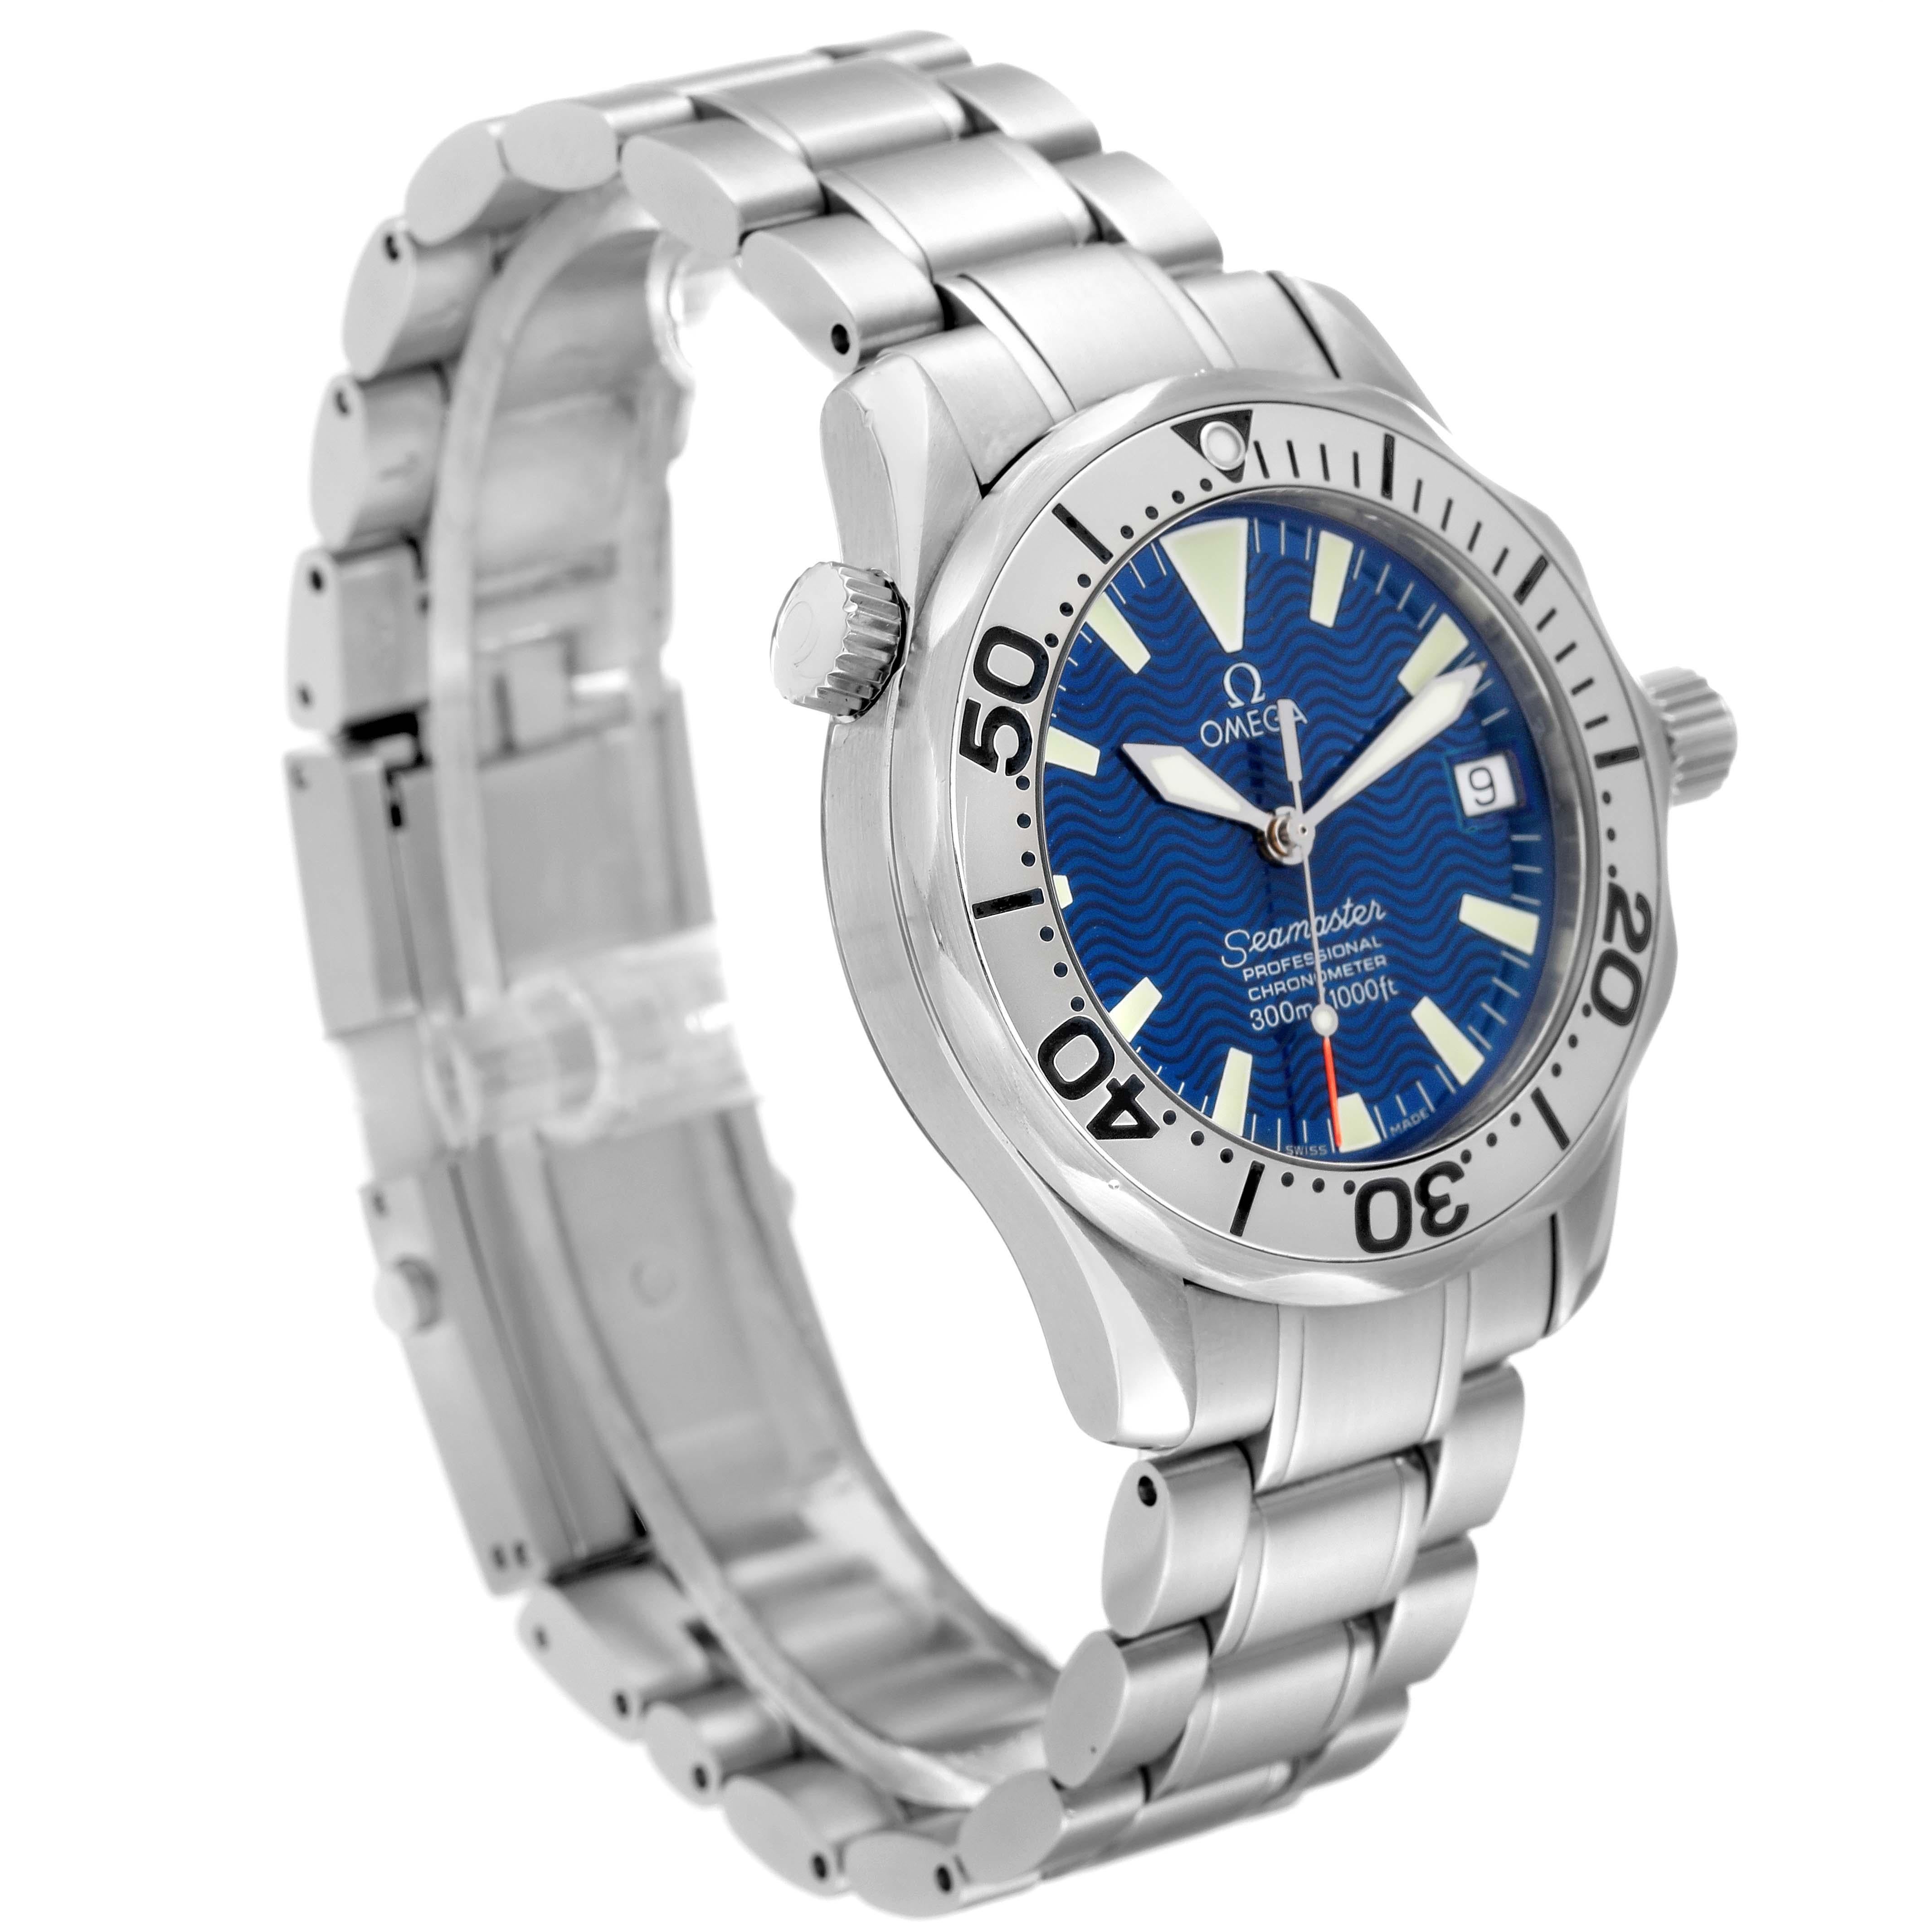 Omega Seamaster 300M Blue Dial Steel Mens Watch 2253.80.00 1